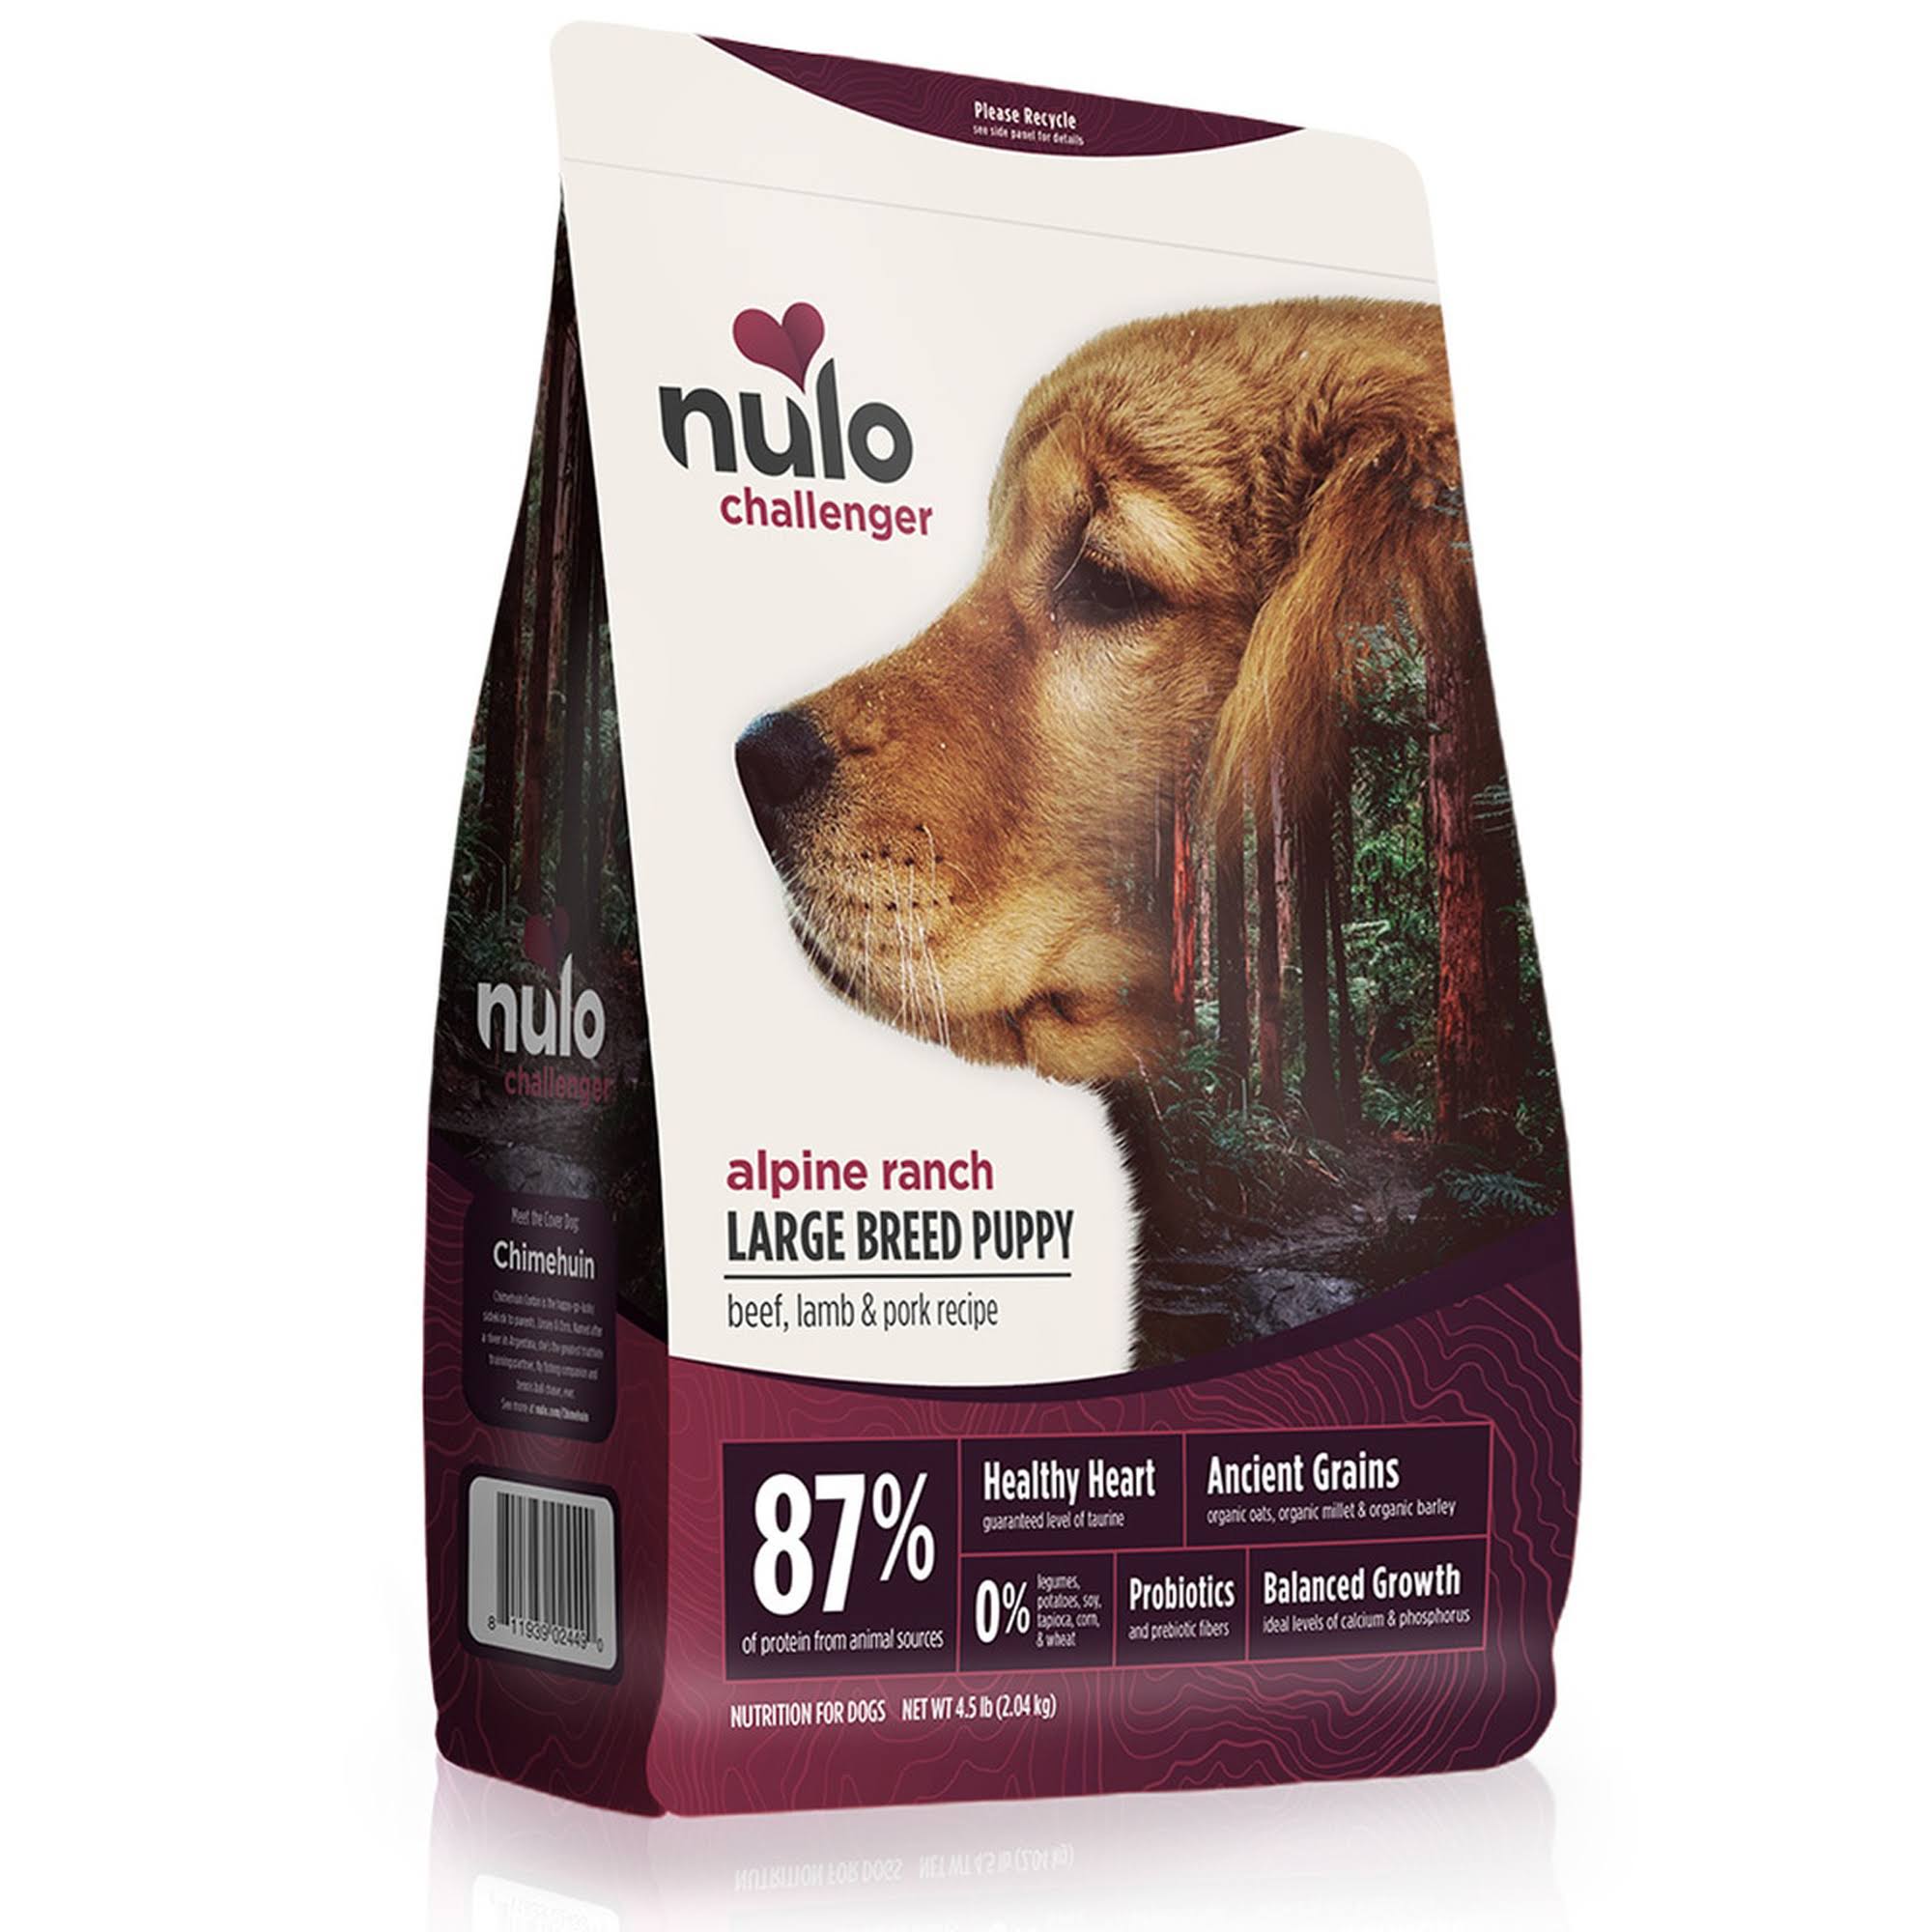 Nulo Challenger Alpine Ranch Beef, Lamb & Pork Dry Dog Food, 11 Pounds